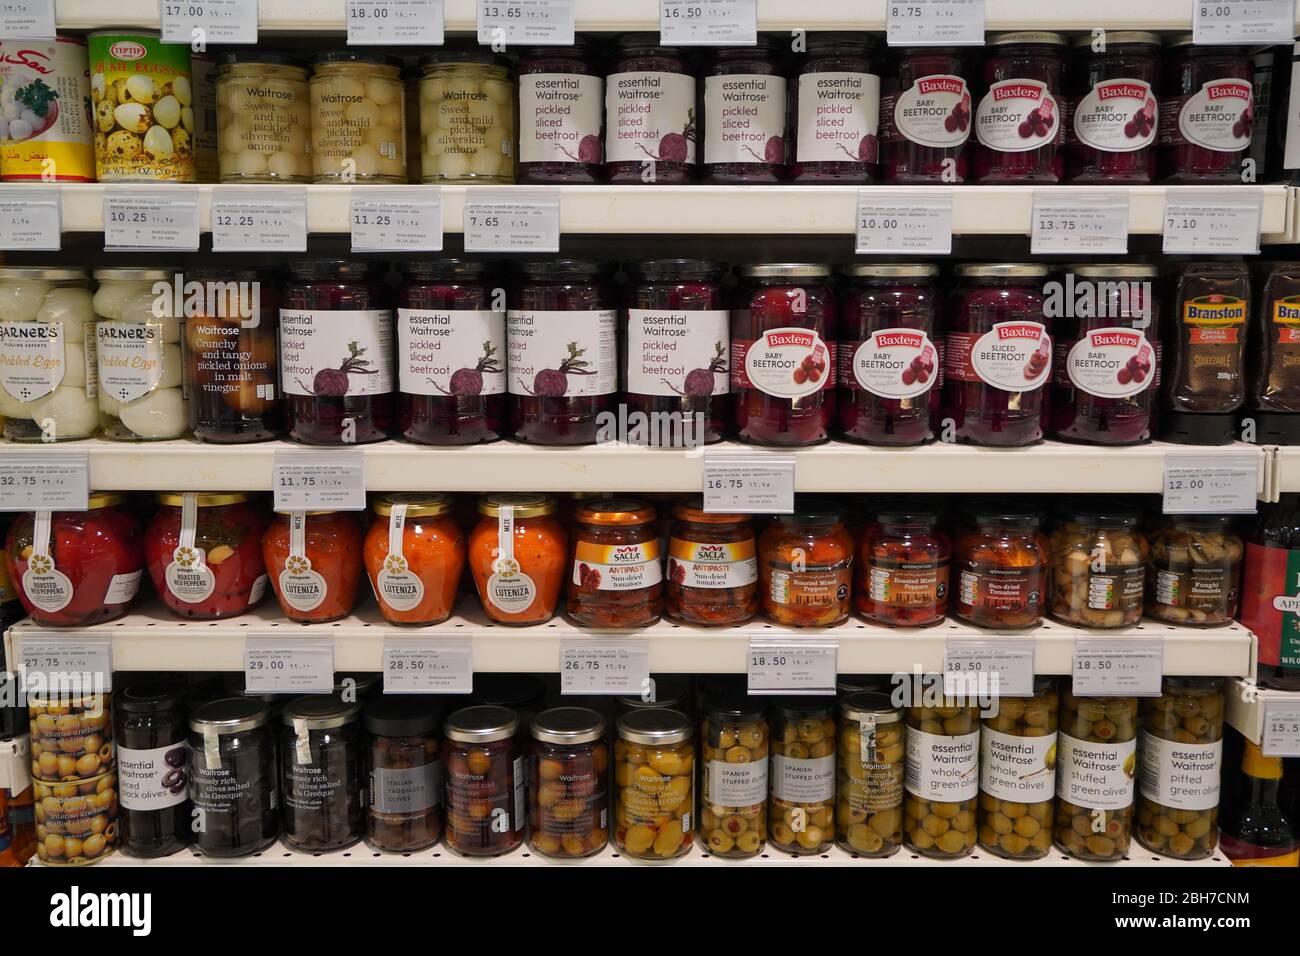 Dubai Uae December 2019 Traditional Turkish Pickles Of Various Fruits And Vegetables. Jars Of Salted Pickles On A Store Shelf. Beetroot, Olives, Cabba Stock Photo